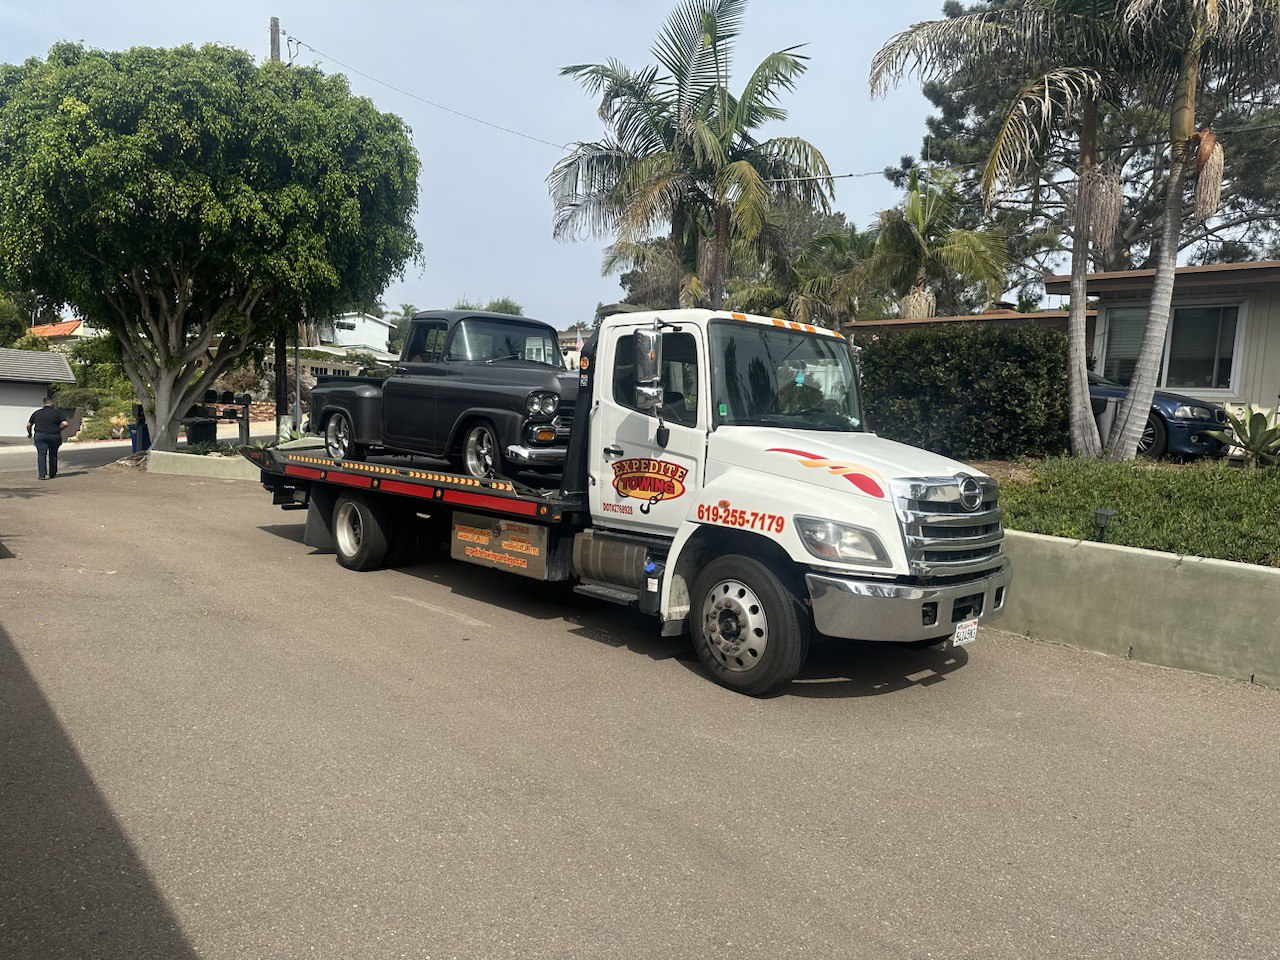 Classic Car Towing Services in San Diego